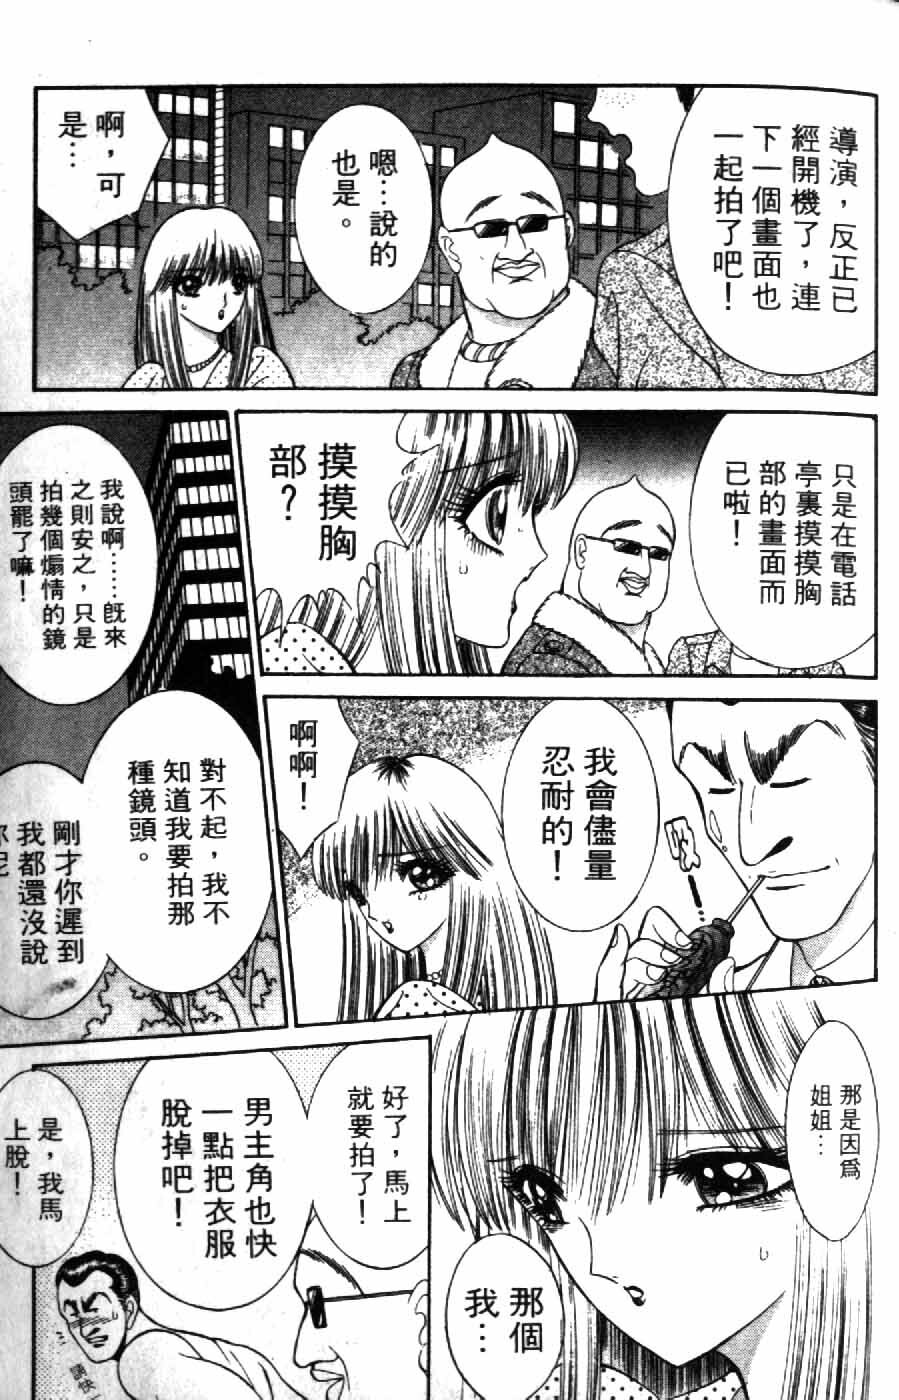 [Senno Knife] Ouma ga Horror Show 2 - Trans Sexual Special Show 2 | 顫慄博覽會 2 [Chinese] page 49 full